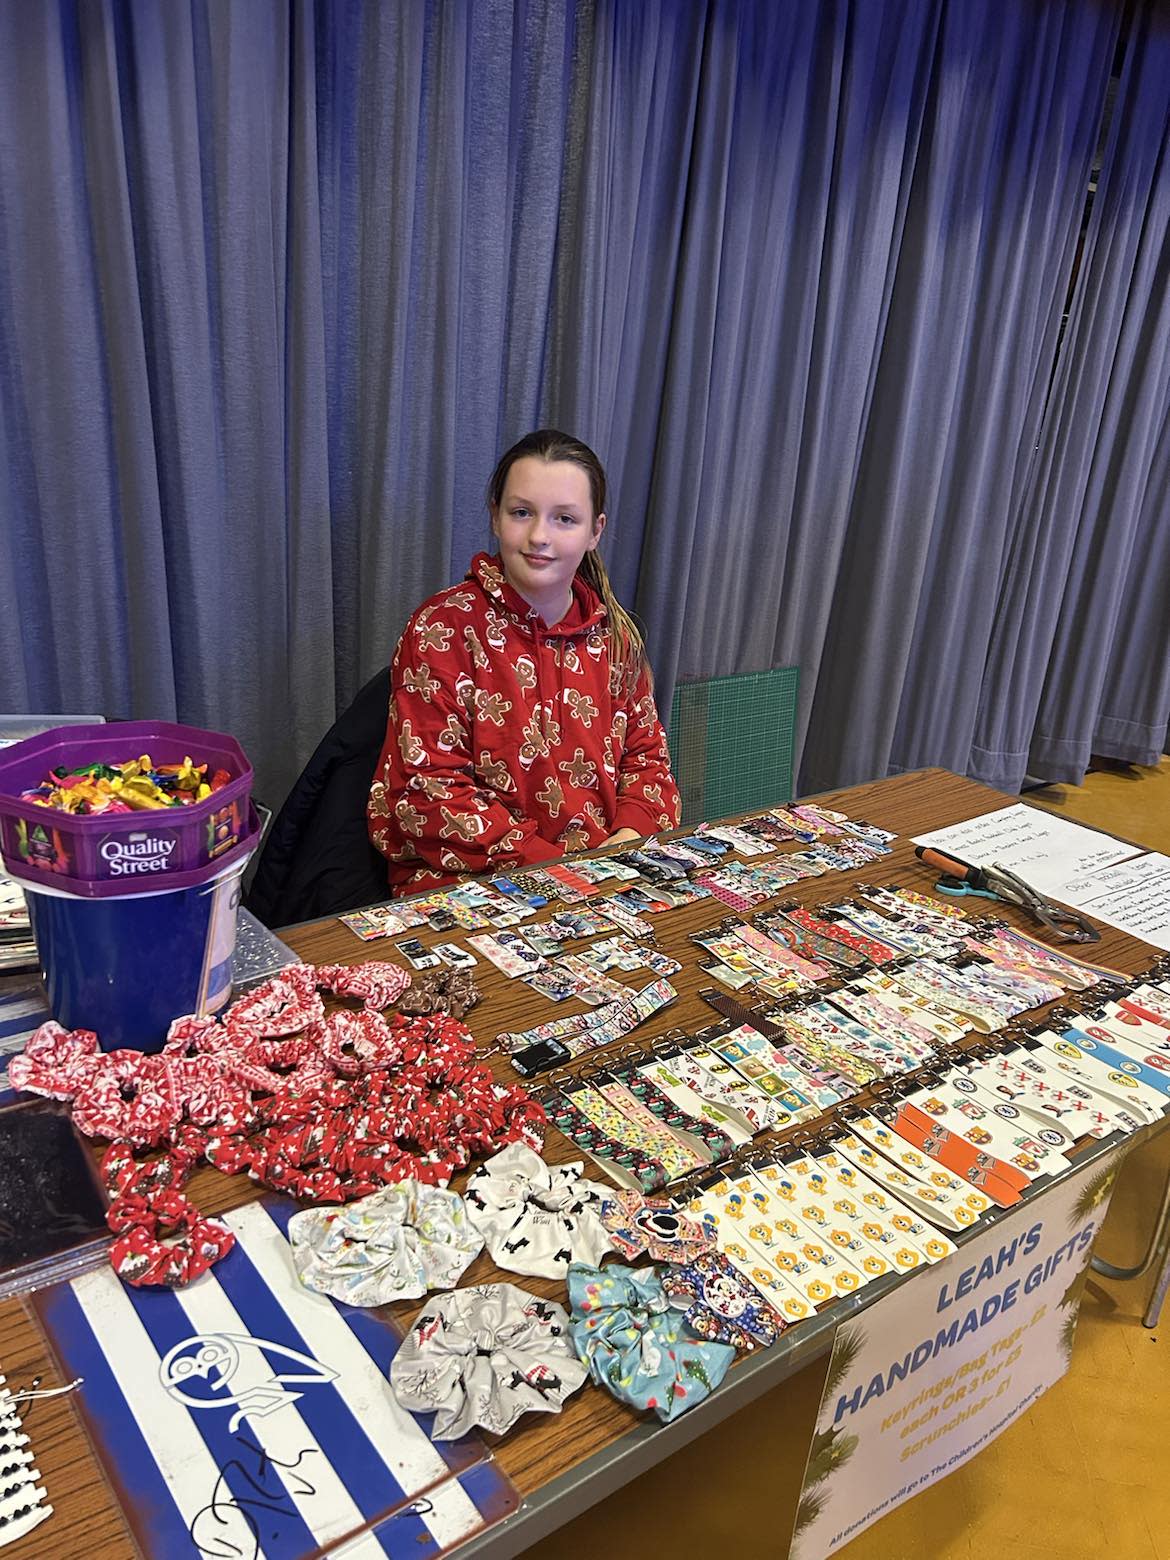 Leah selling her items at a stall at Sheffield Children’s Hospital (Craig Walton/PA)